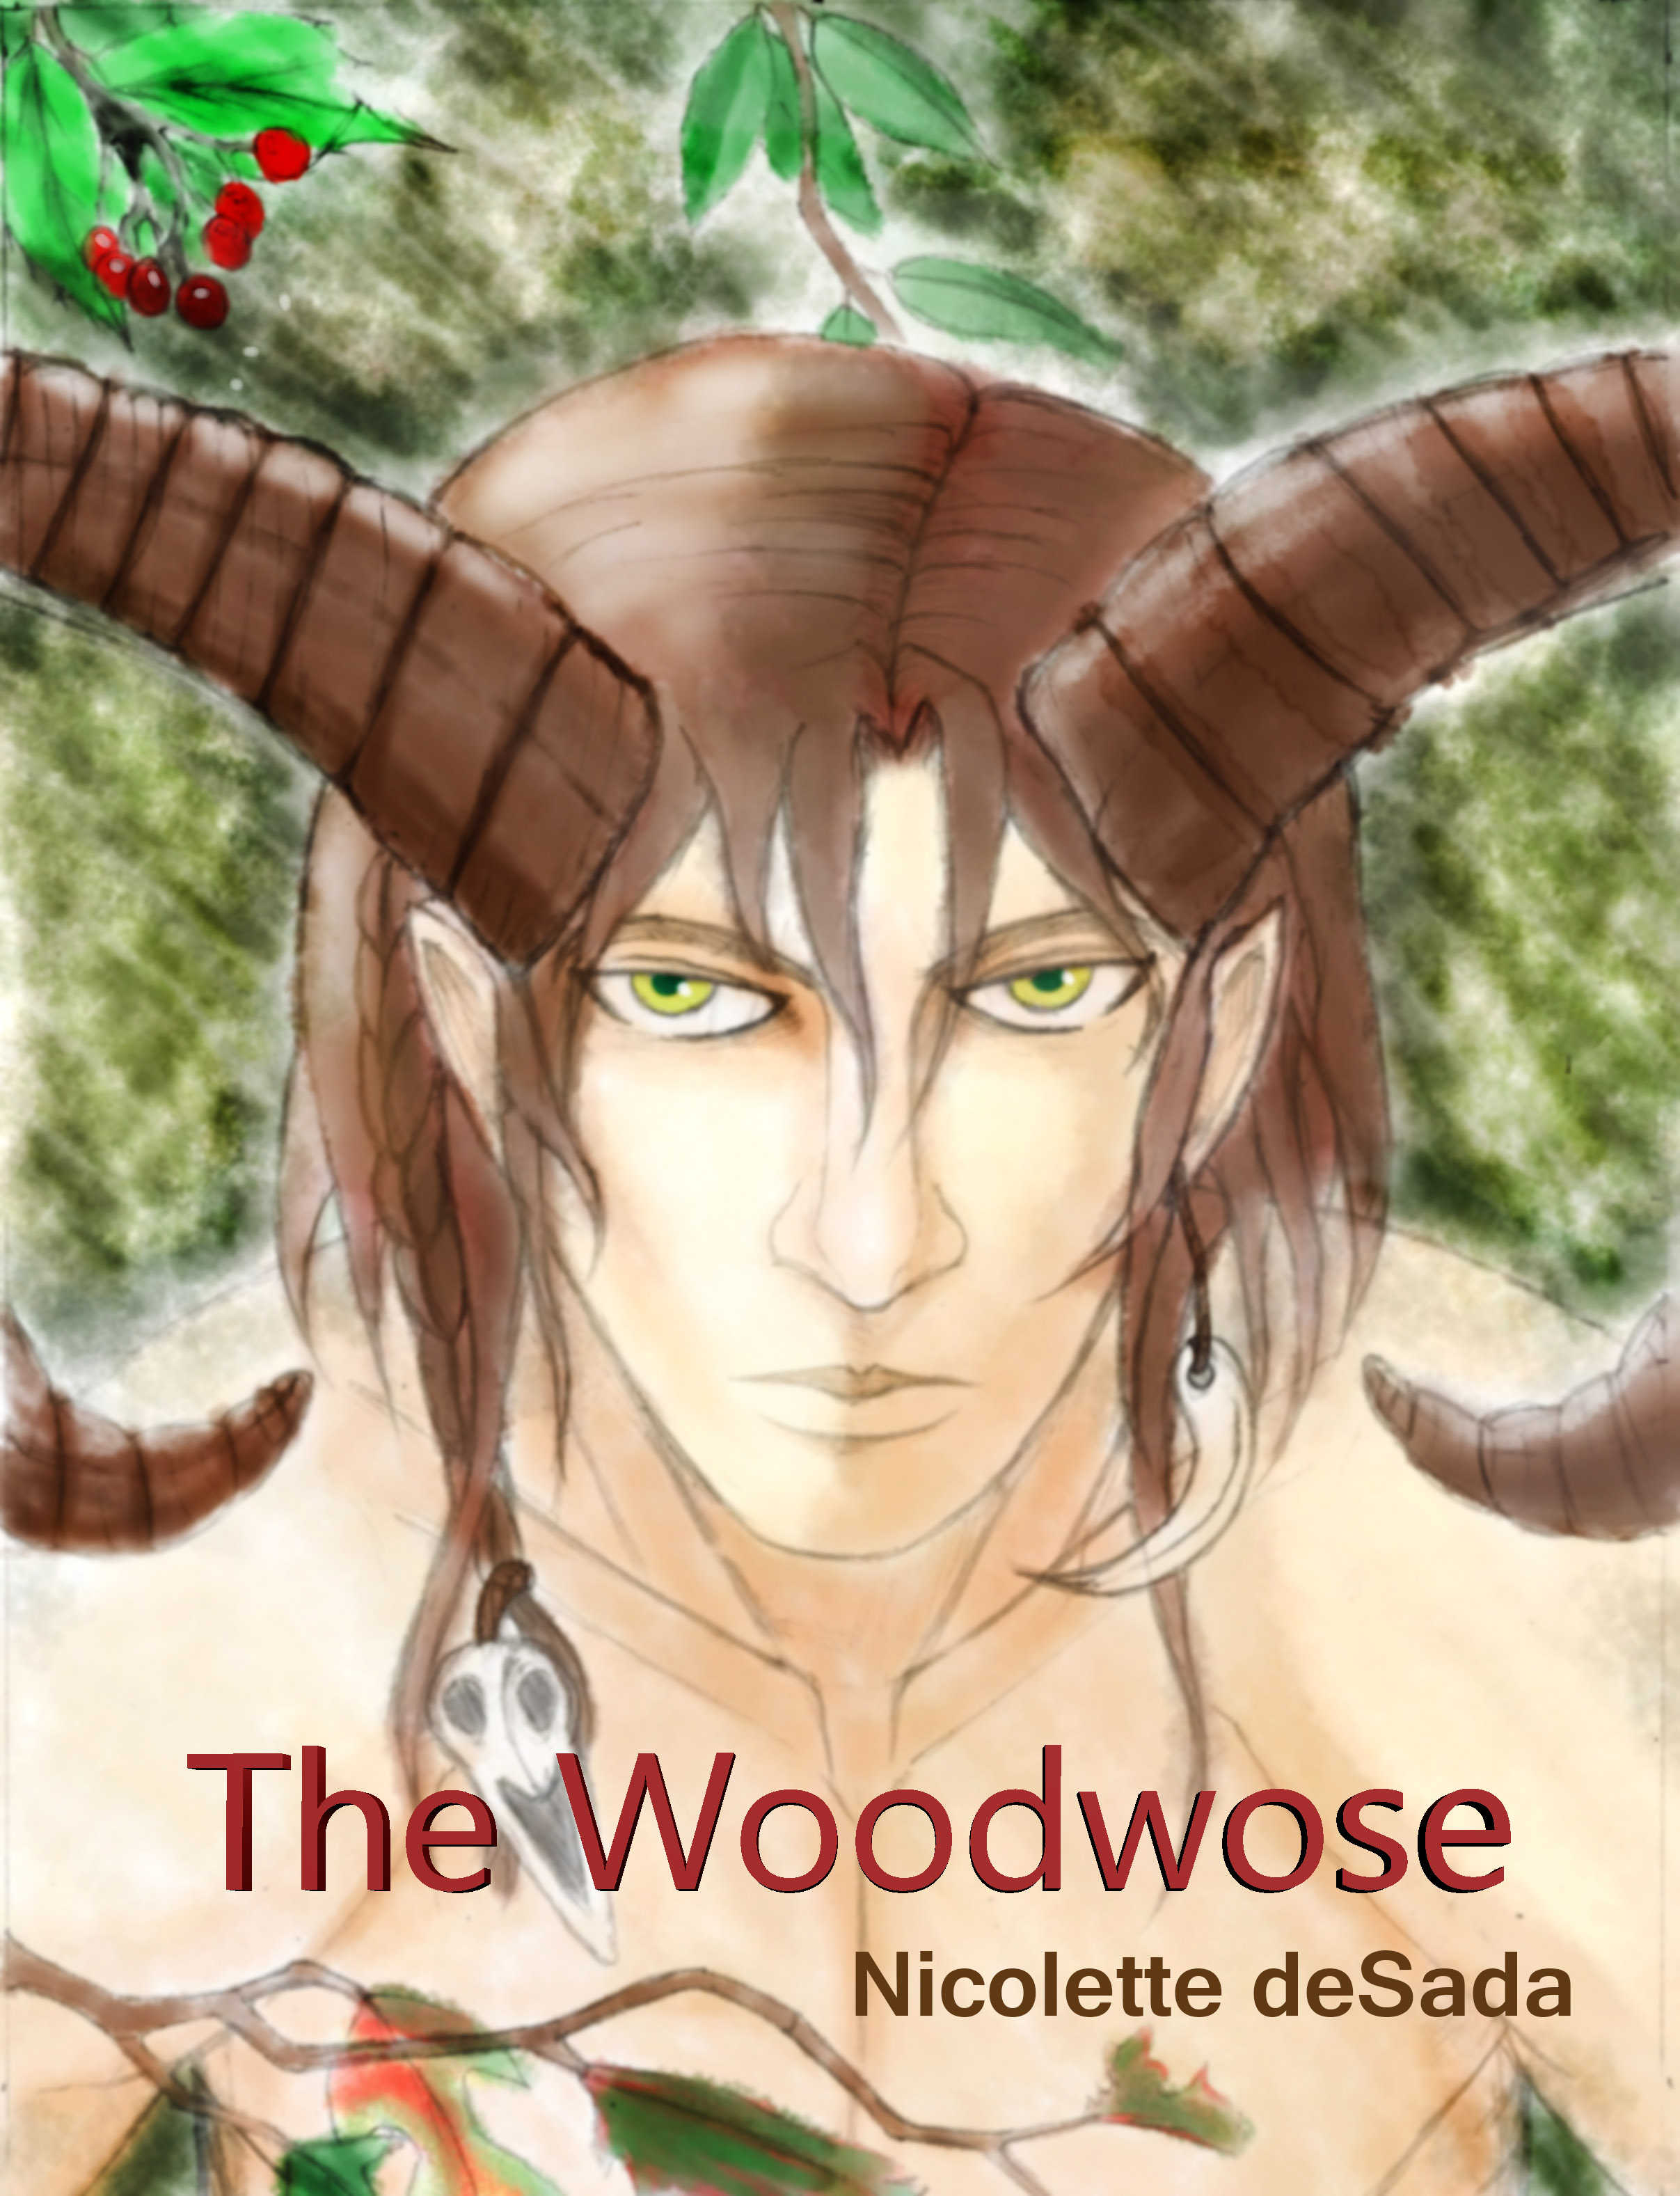 The Woodwose by Nicolette deSada